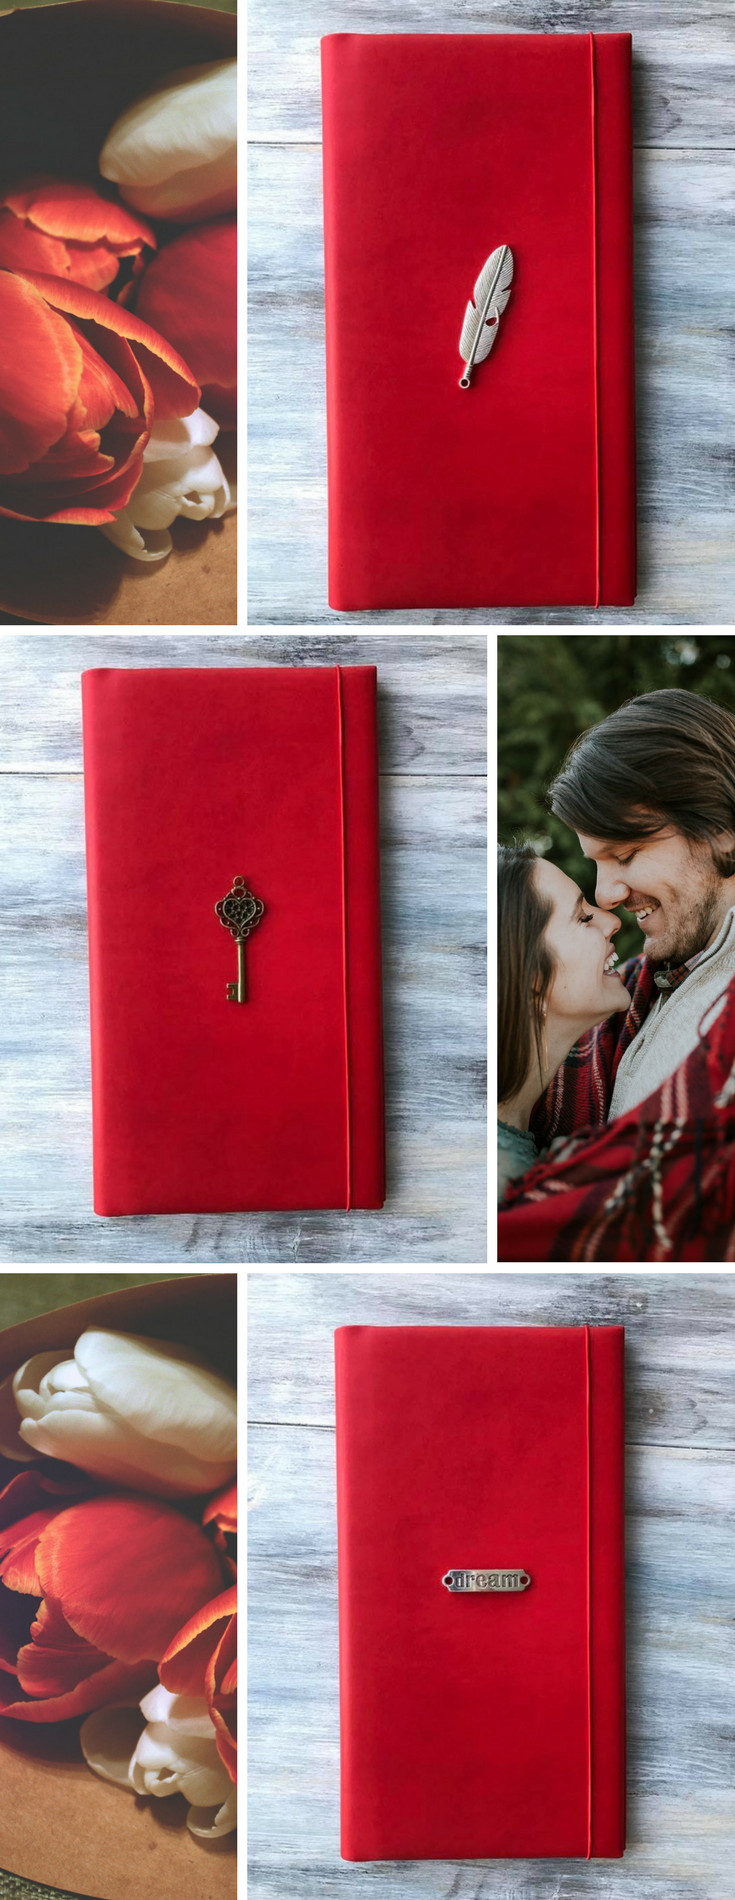 Sentimental Gift Ideas For Girlfriend
 IN RED Romantic and Inexpensive Gift Ideas for Your